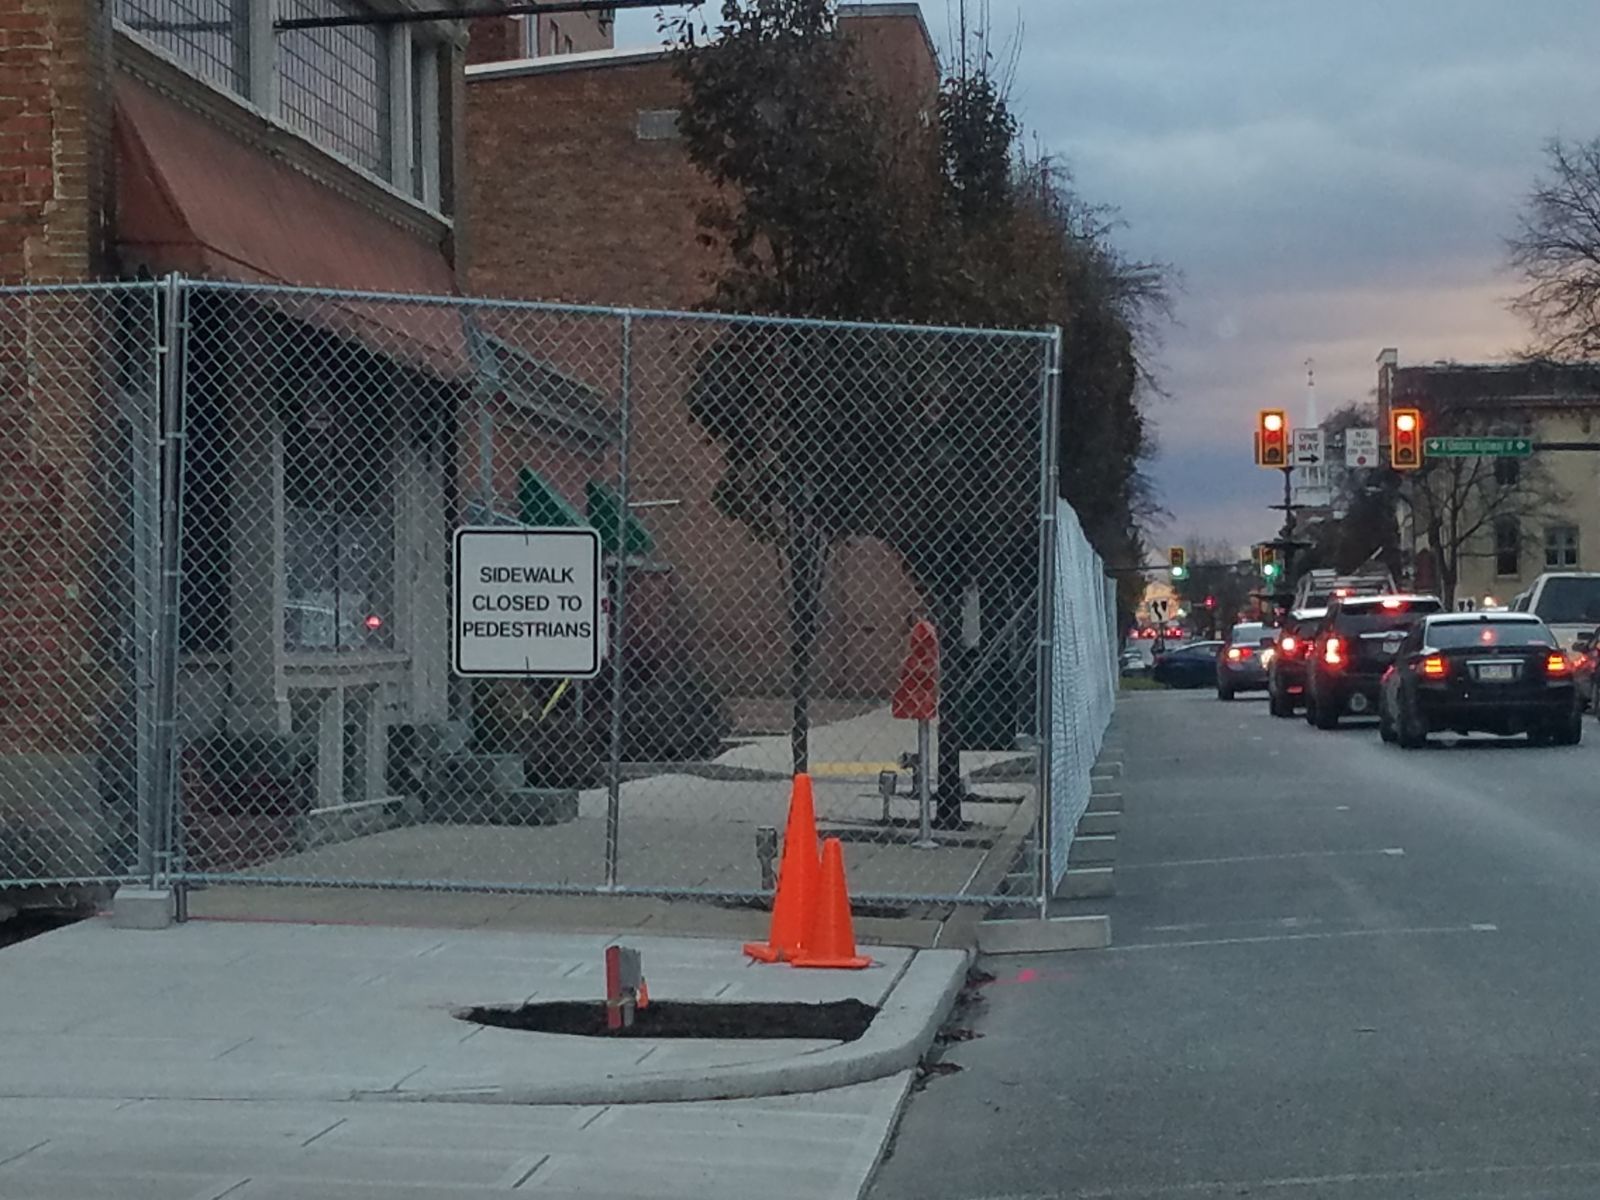 Sidewalk fencing along Main Street in Chambersburg with closed to pedestrian traffic sign.